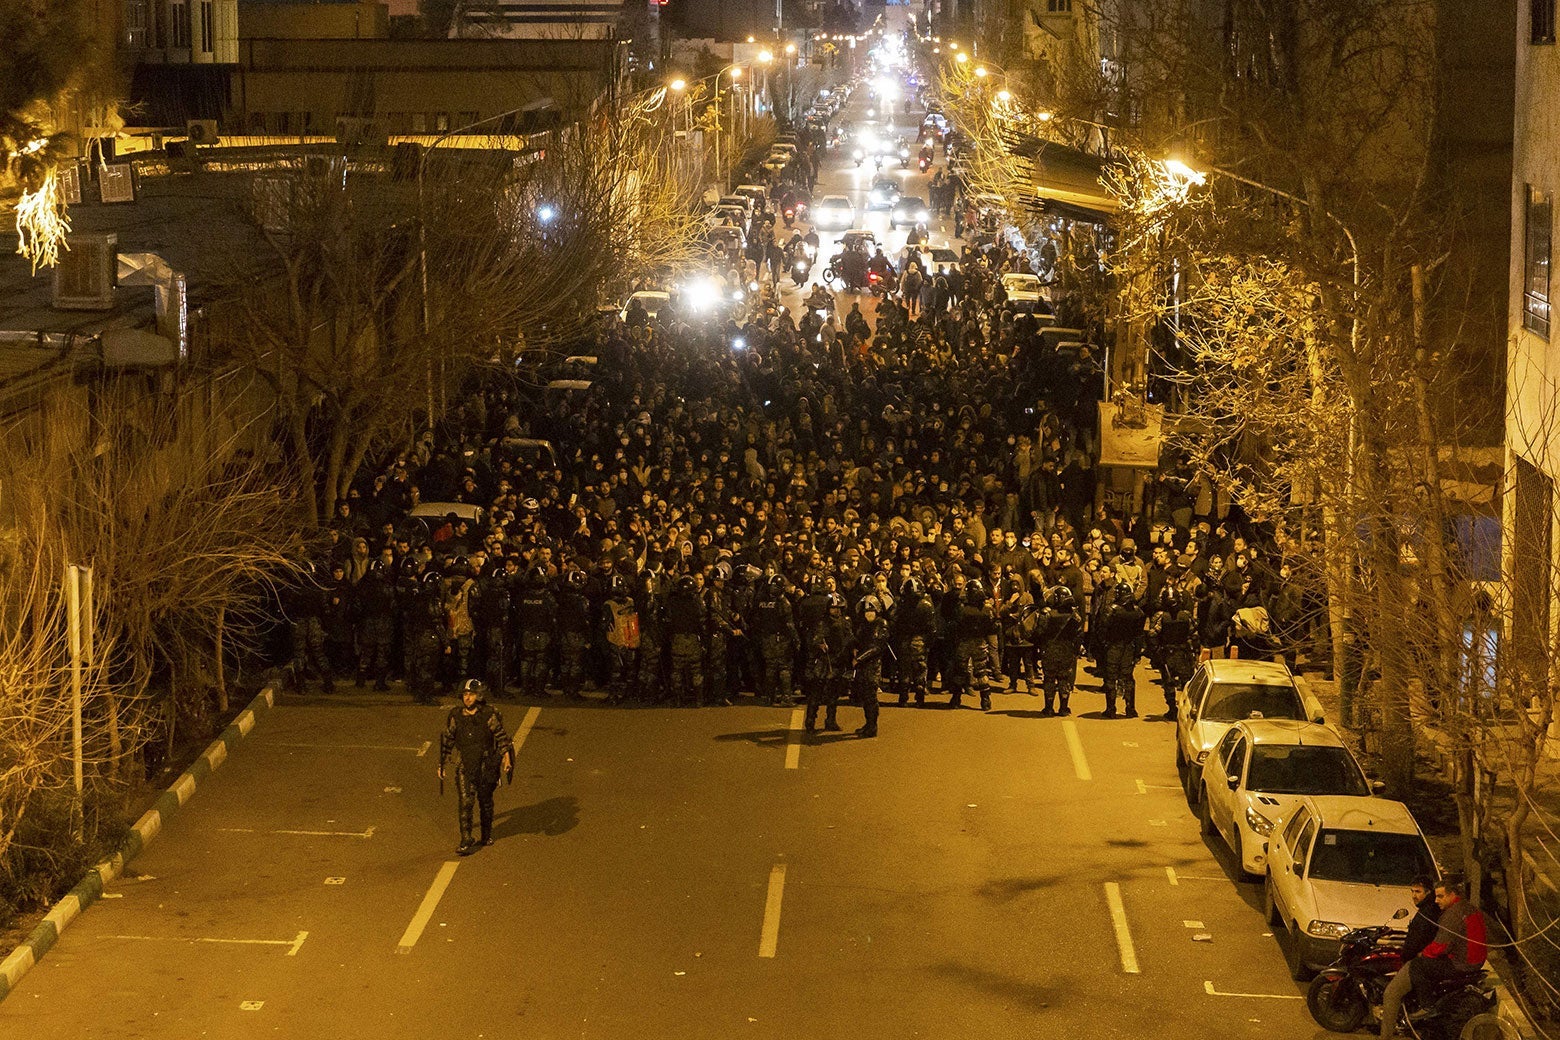 A massive is crowd seen walking on a wide street, led by a cop in riot gear out front. Behind the protesters, cars stand, shining their headlights.